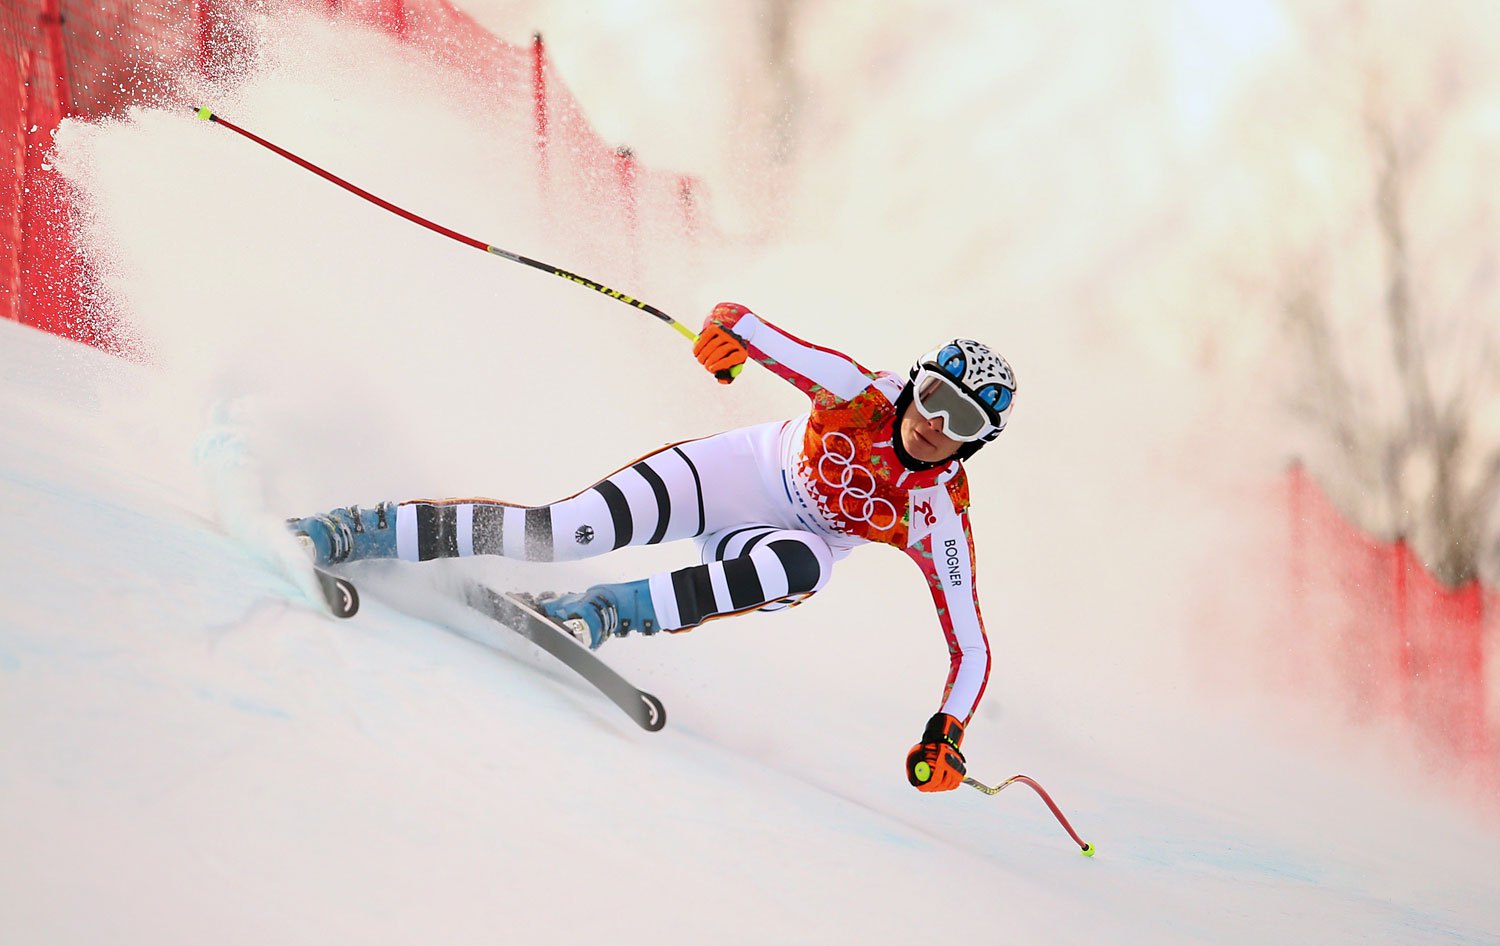 Maria Hoefl-Riesch of Germany competes in the Ladies' Super Combined Downhill in Rosa Khutor Alpine Center at the Sochi 2014 Olympic Games, Feb. 10, 2014.